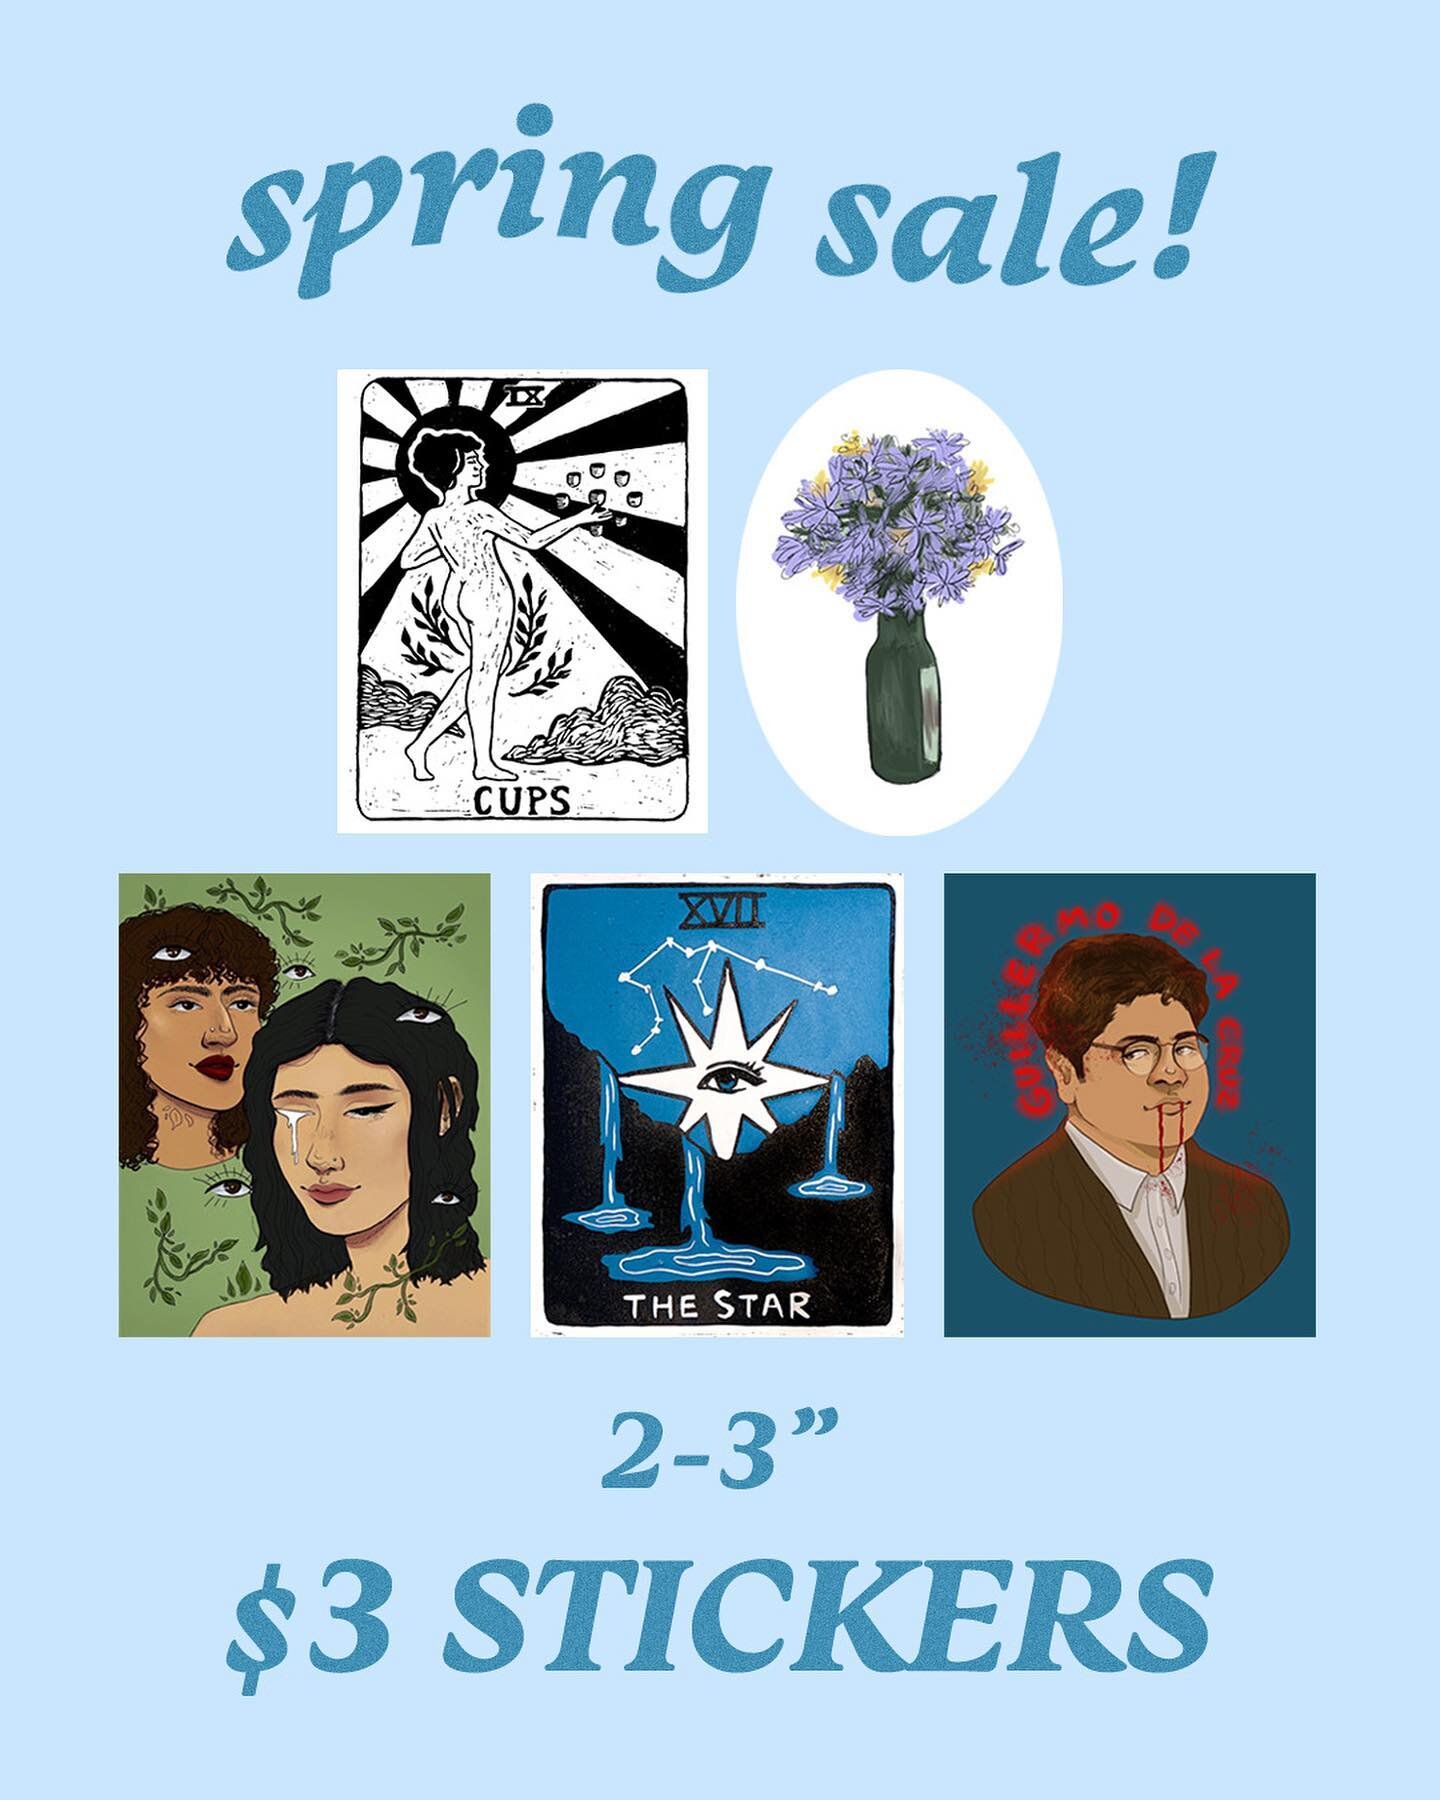 Prints and stickers for sale!! Free shipping for stickers and small prints, $2 shipping for large prints, and free local delivery or pickup!

And enjoy a $1 discount if you order 3 or more stickers, and a $3 discount if you order 3 or more prints 😎 